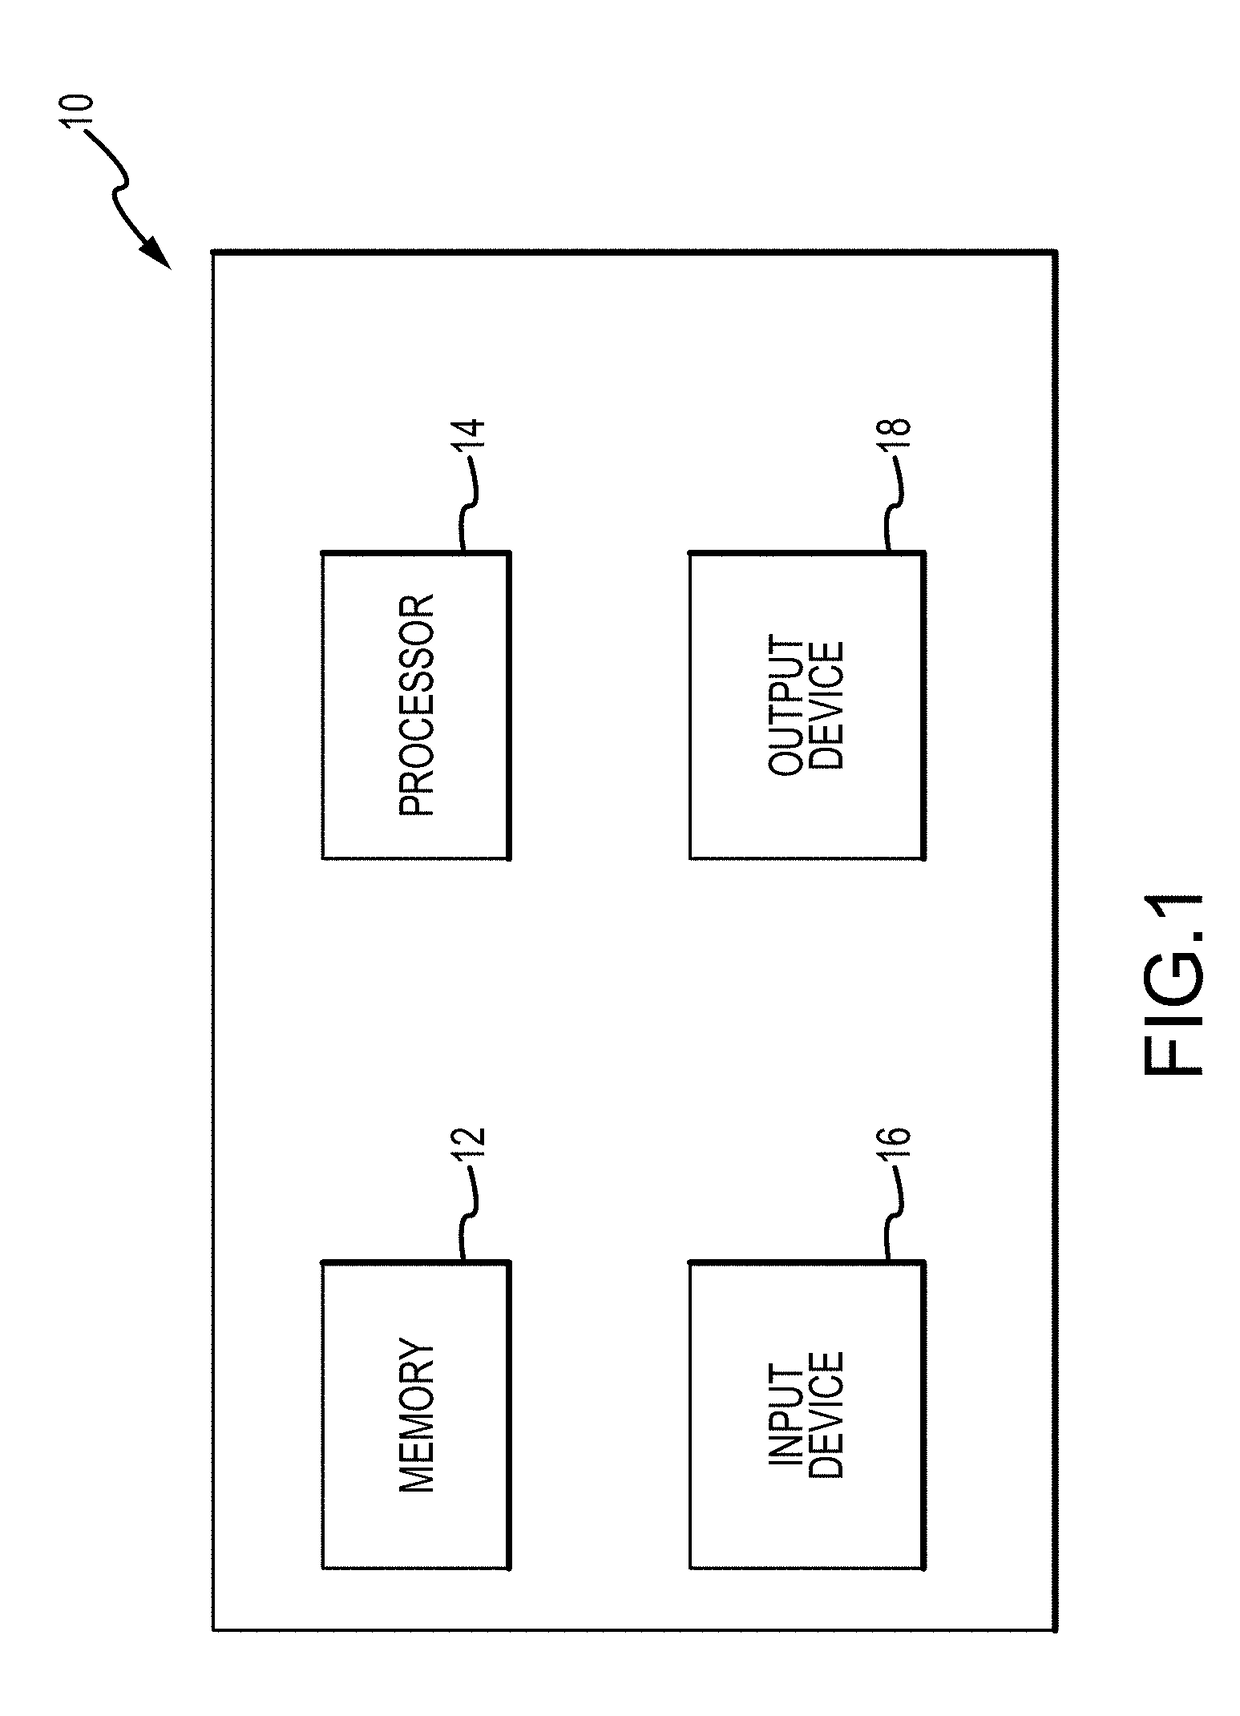 System and method for model compression of neural networks for use in embedded platforms